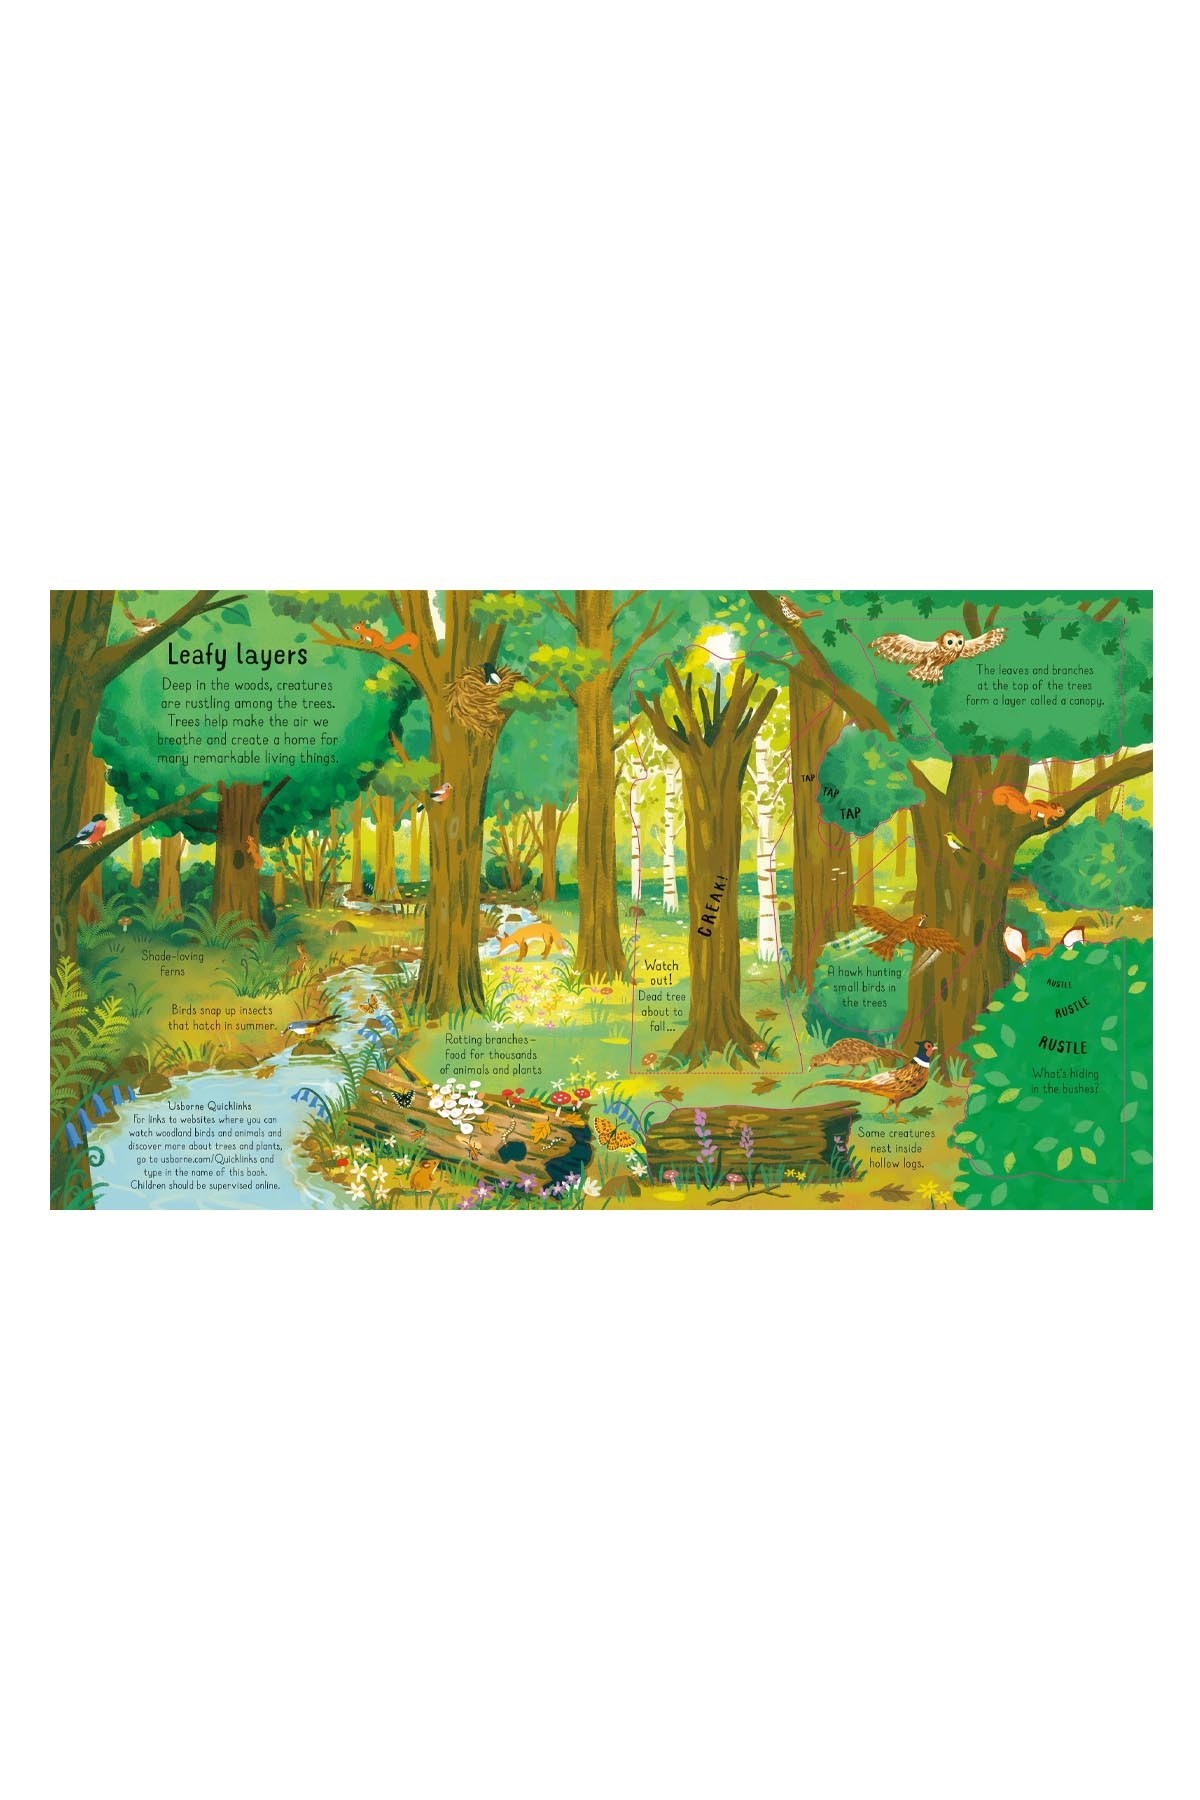 The Usborne Look Inside The Woods